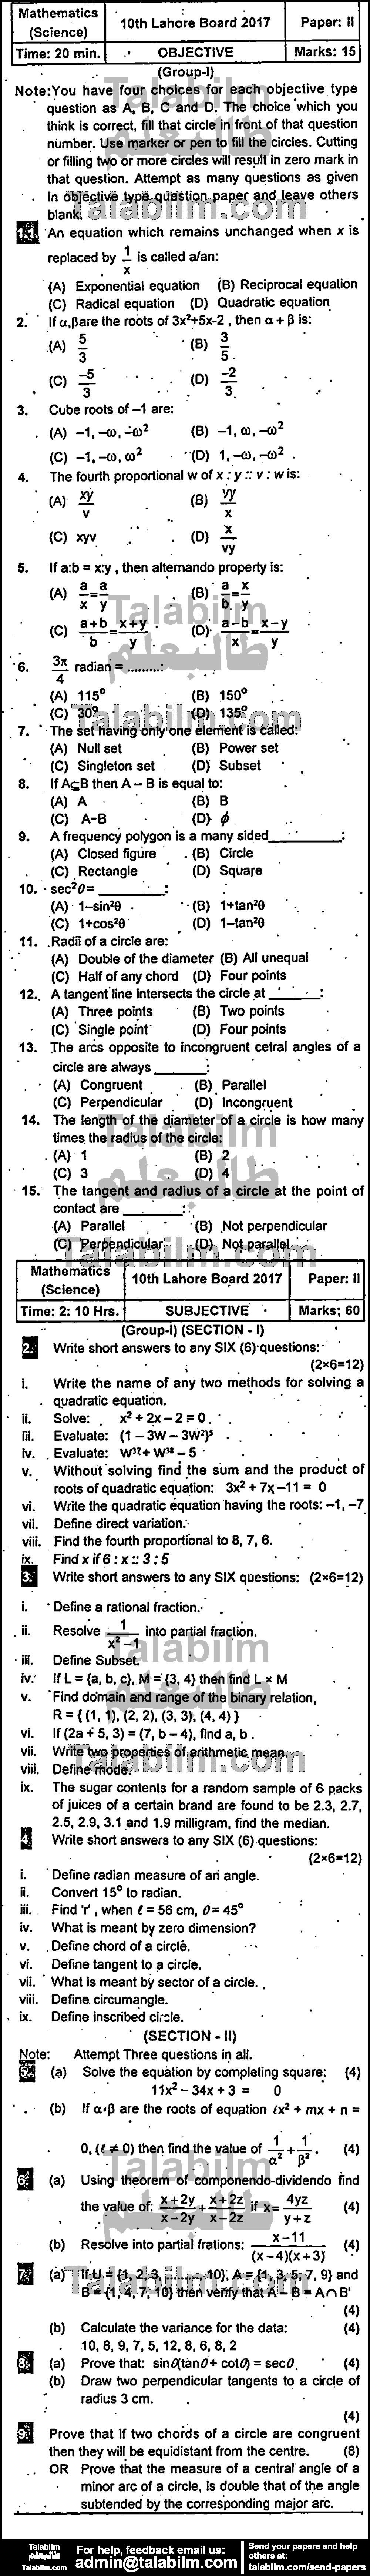 Math 0 past paper for 2017 Group-I